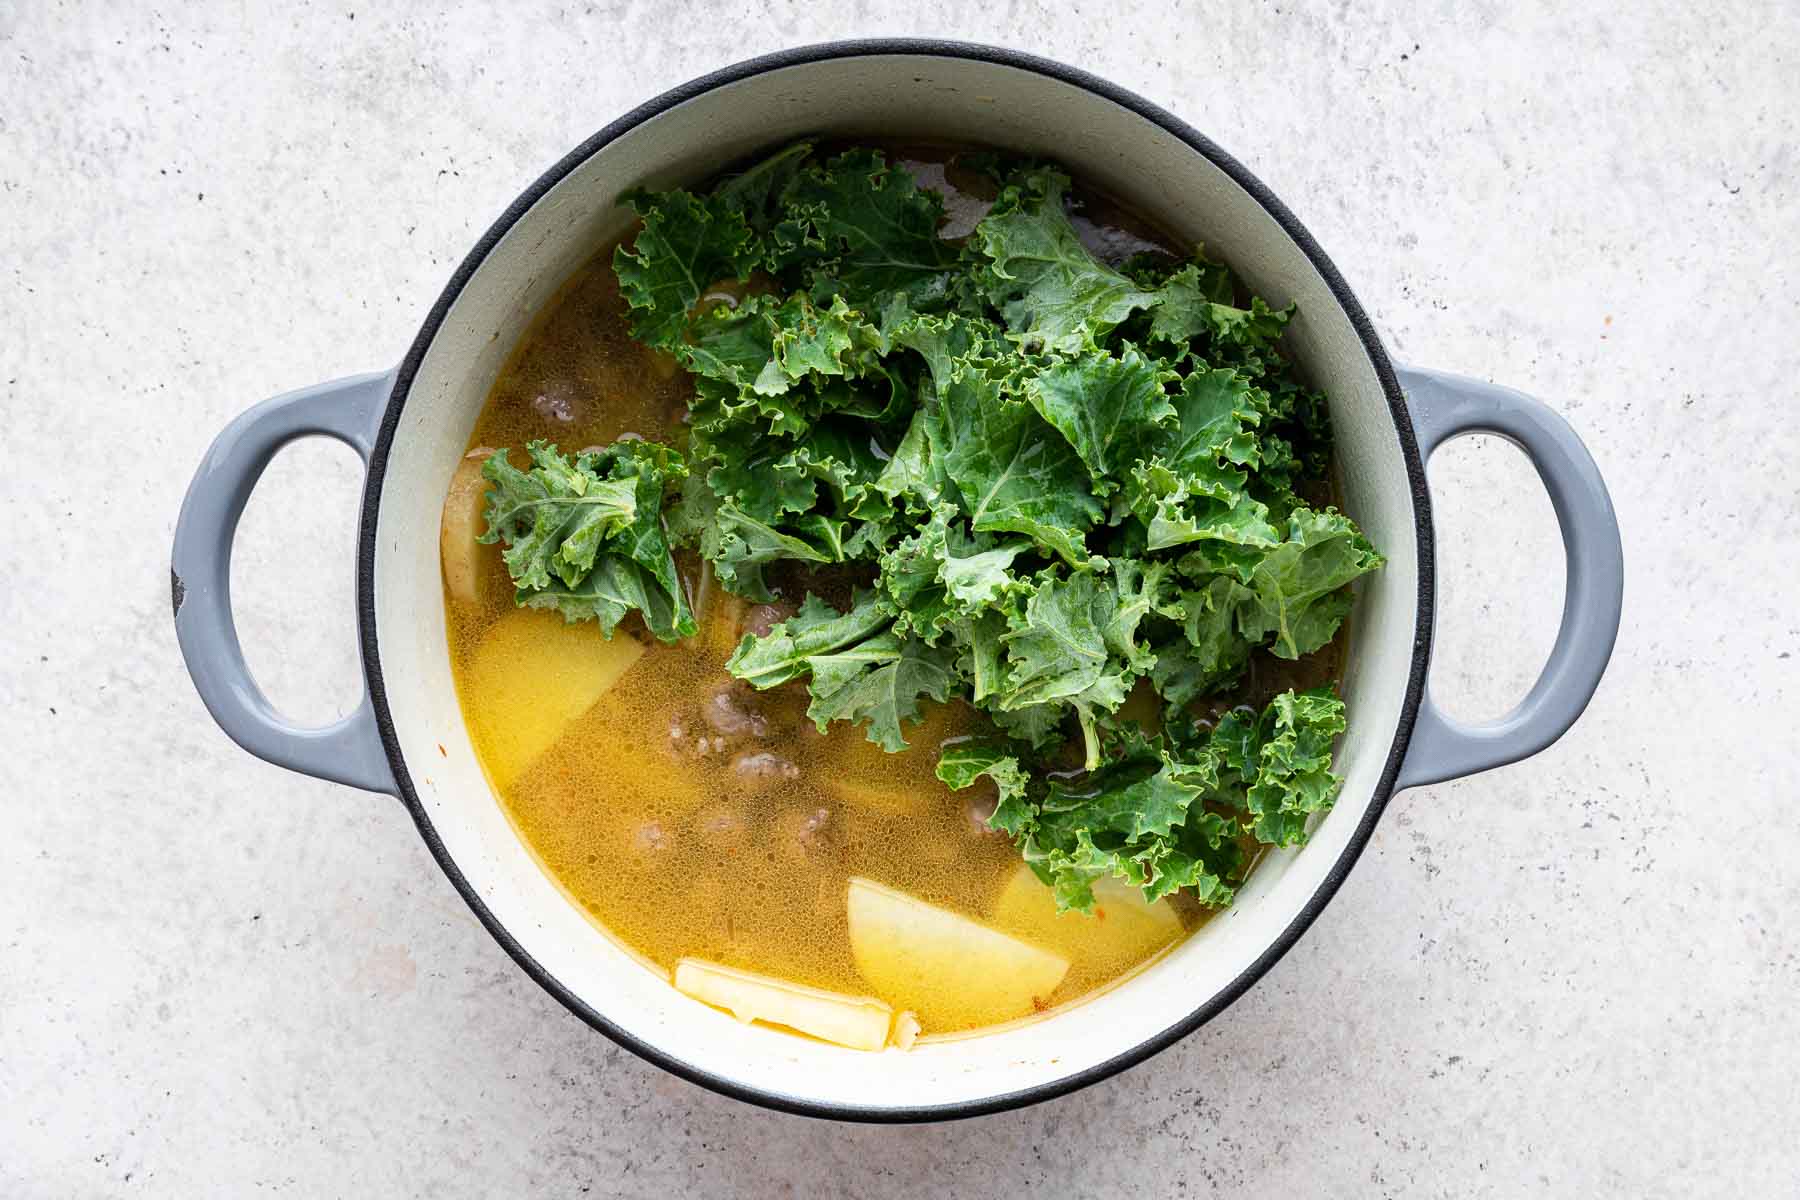 Adding kale to zuppa toscana soup on stove.